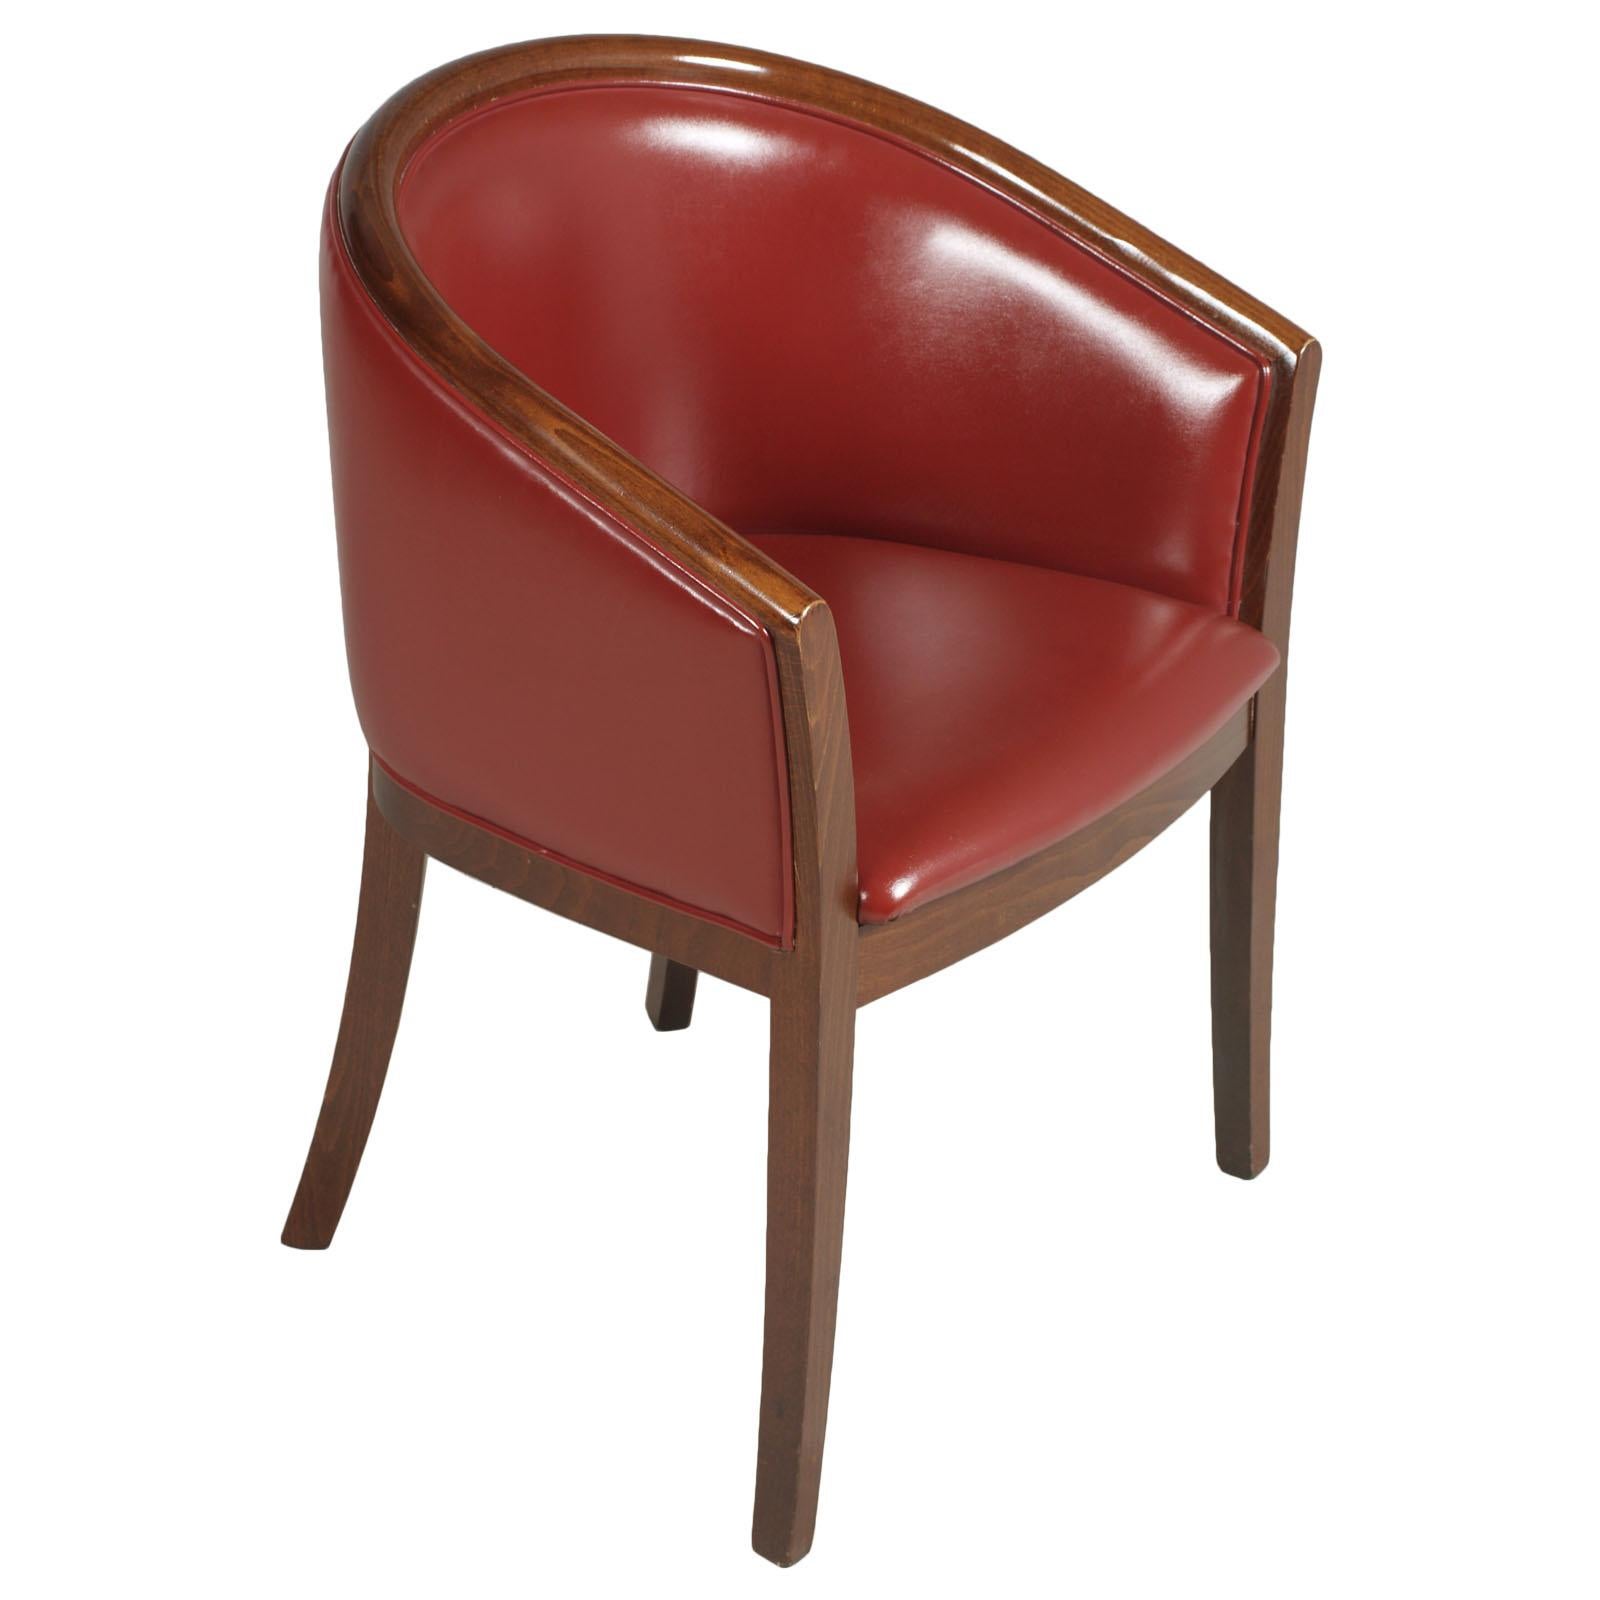 1930s Italian club lounge chairs, armchairs, Art Deco, restored, new red leather bordeaux upholstery, walnut wax polished Jules Leleu style.

These classic red armchairs feature a padded back and seat. The seat is thick and comfortable. The